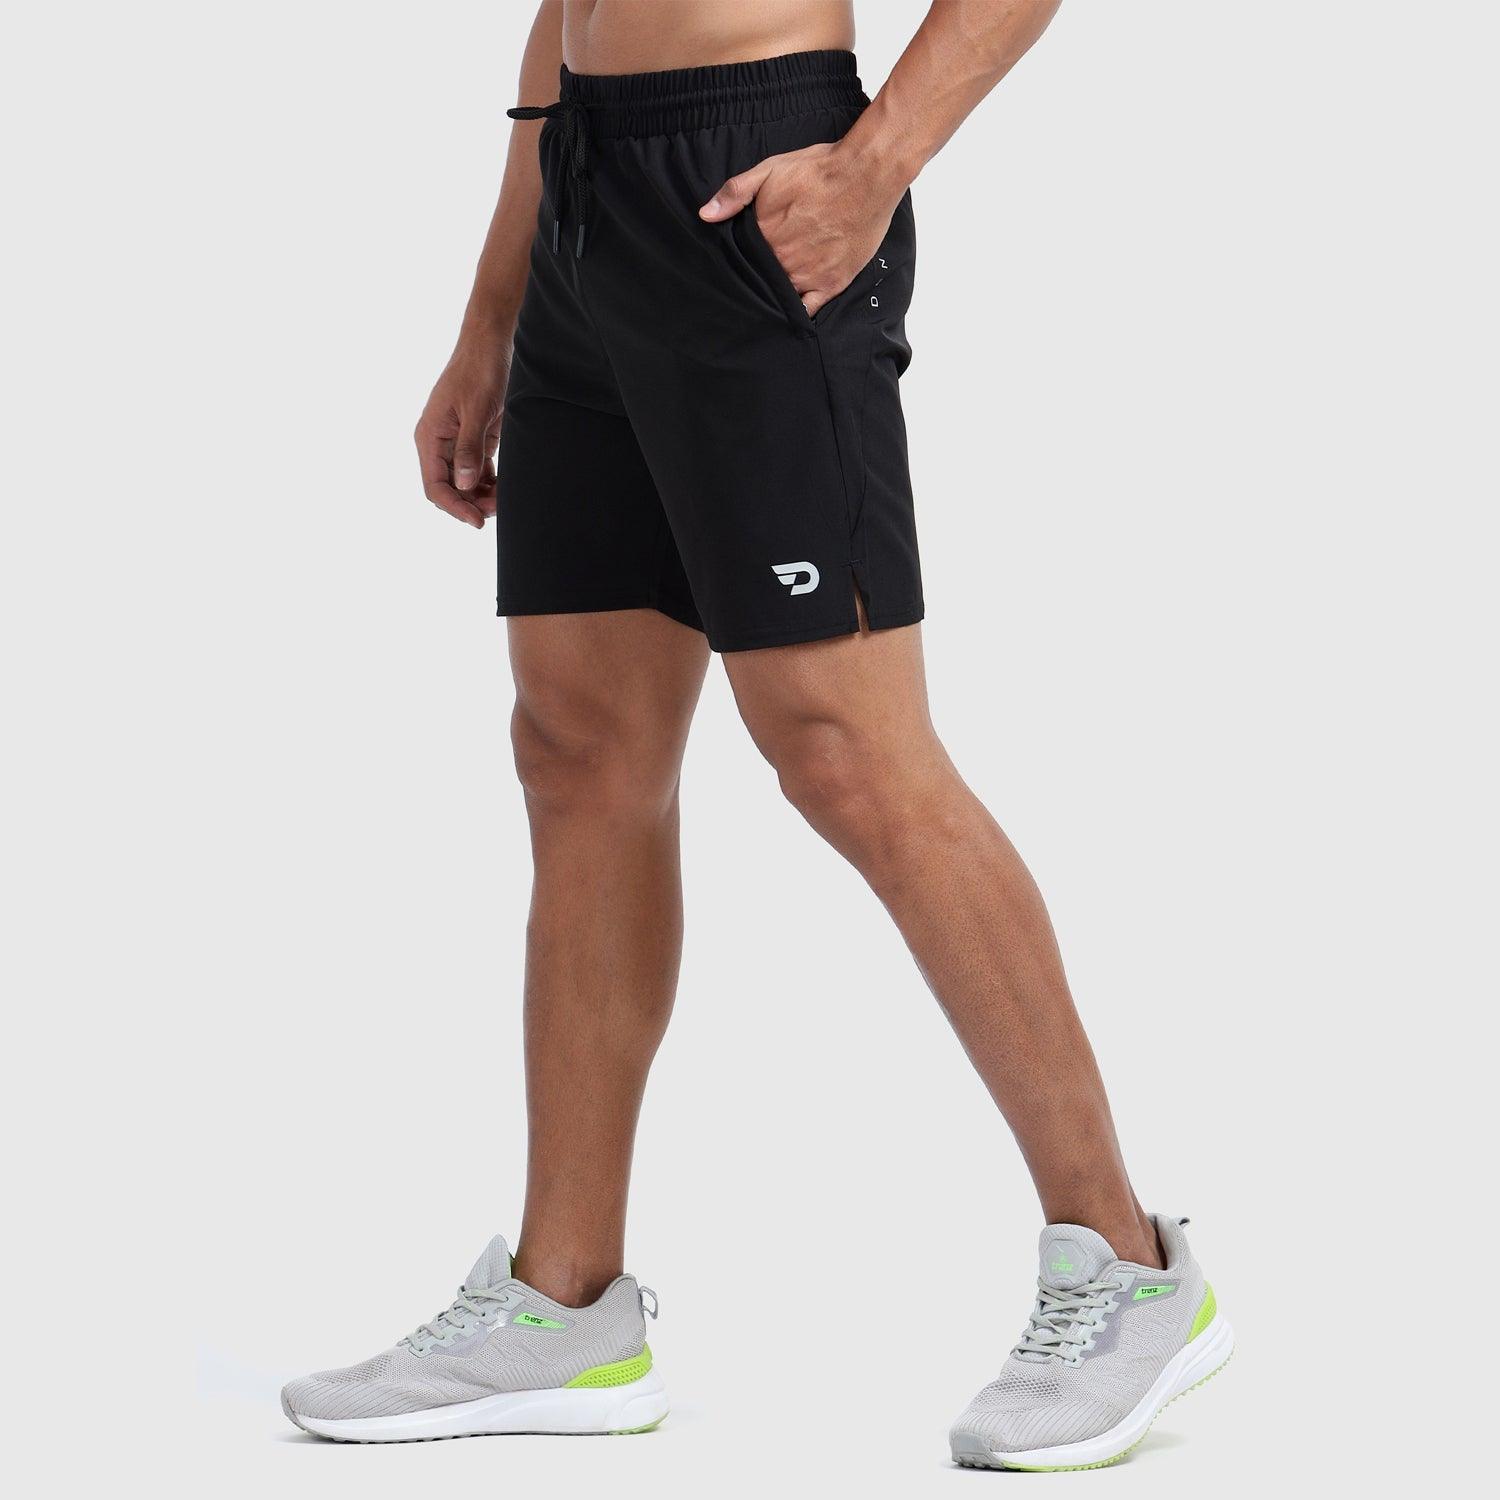 Denmonk's fashionable Coastline Comfort black shorts for men will boost your level of gym fitness.